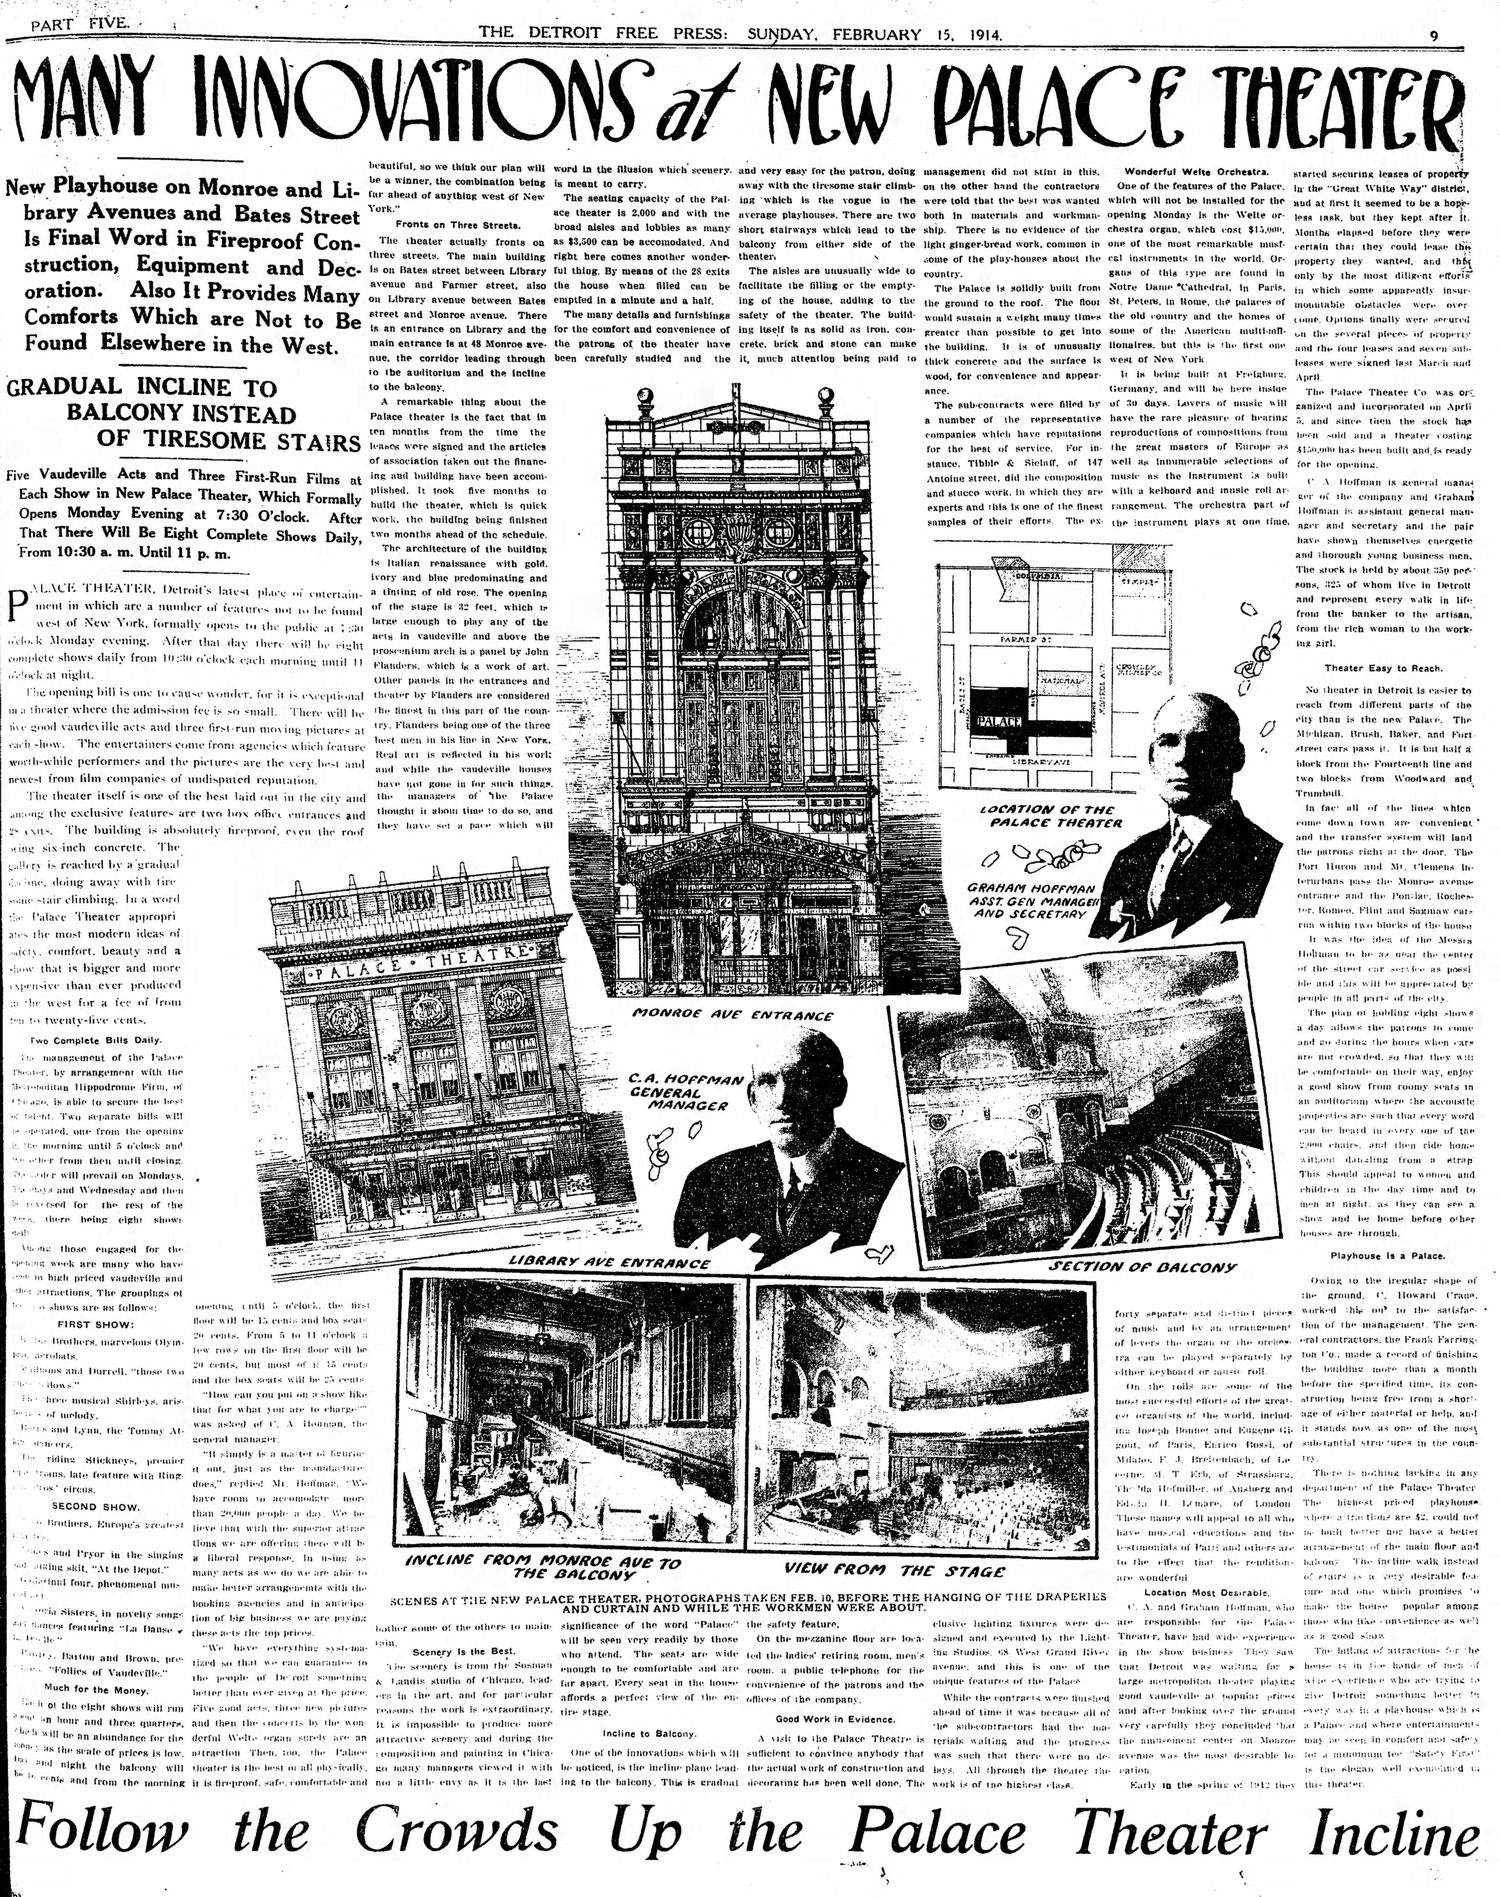 Feb 15 1914 article Palace Theatre (Alhambra Theater), Detroit